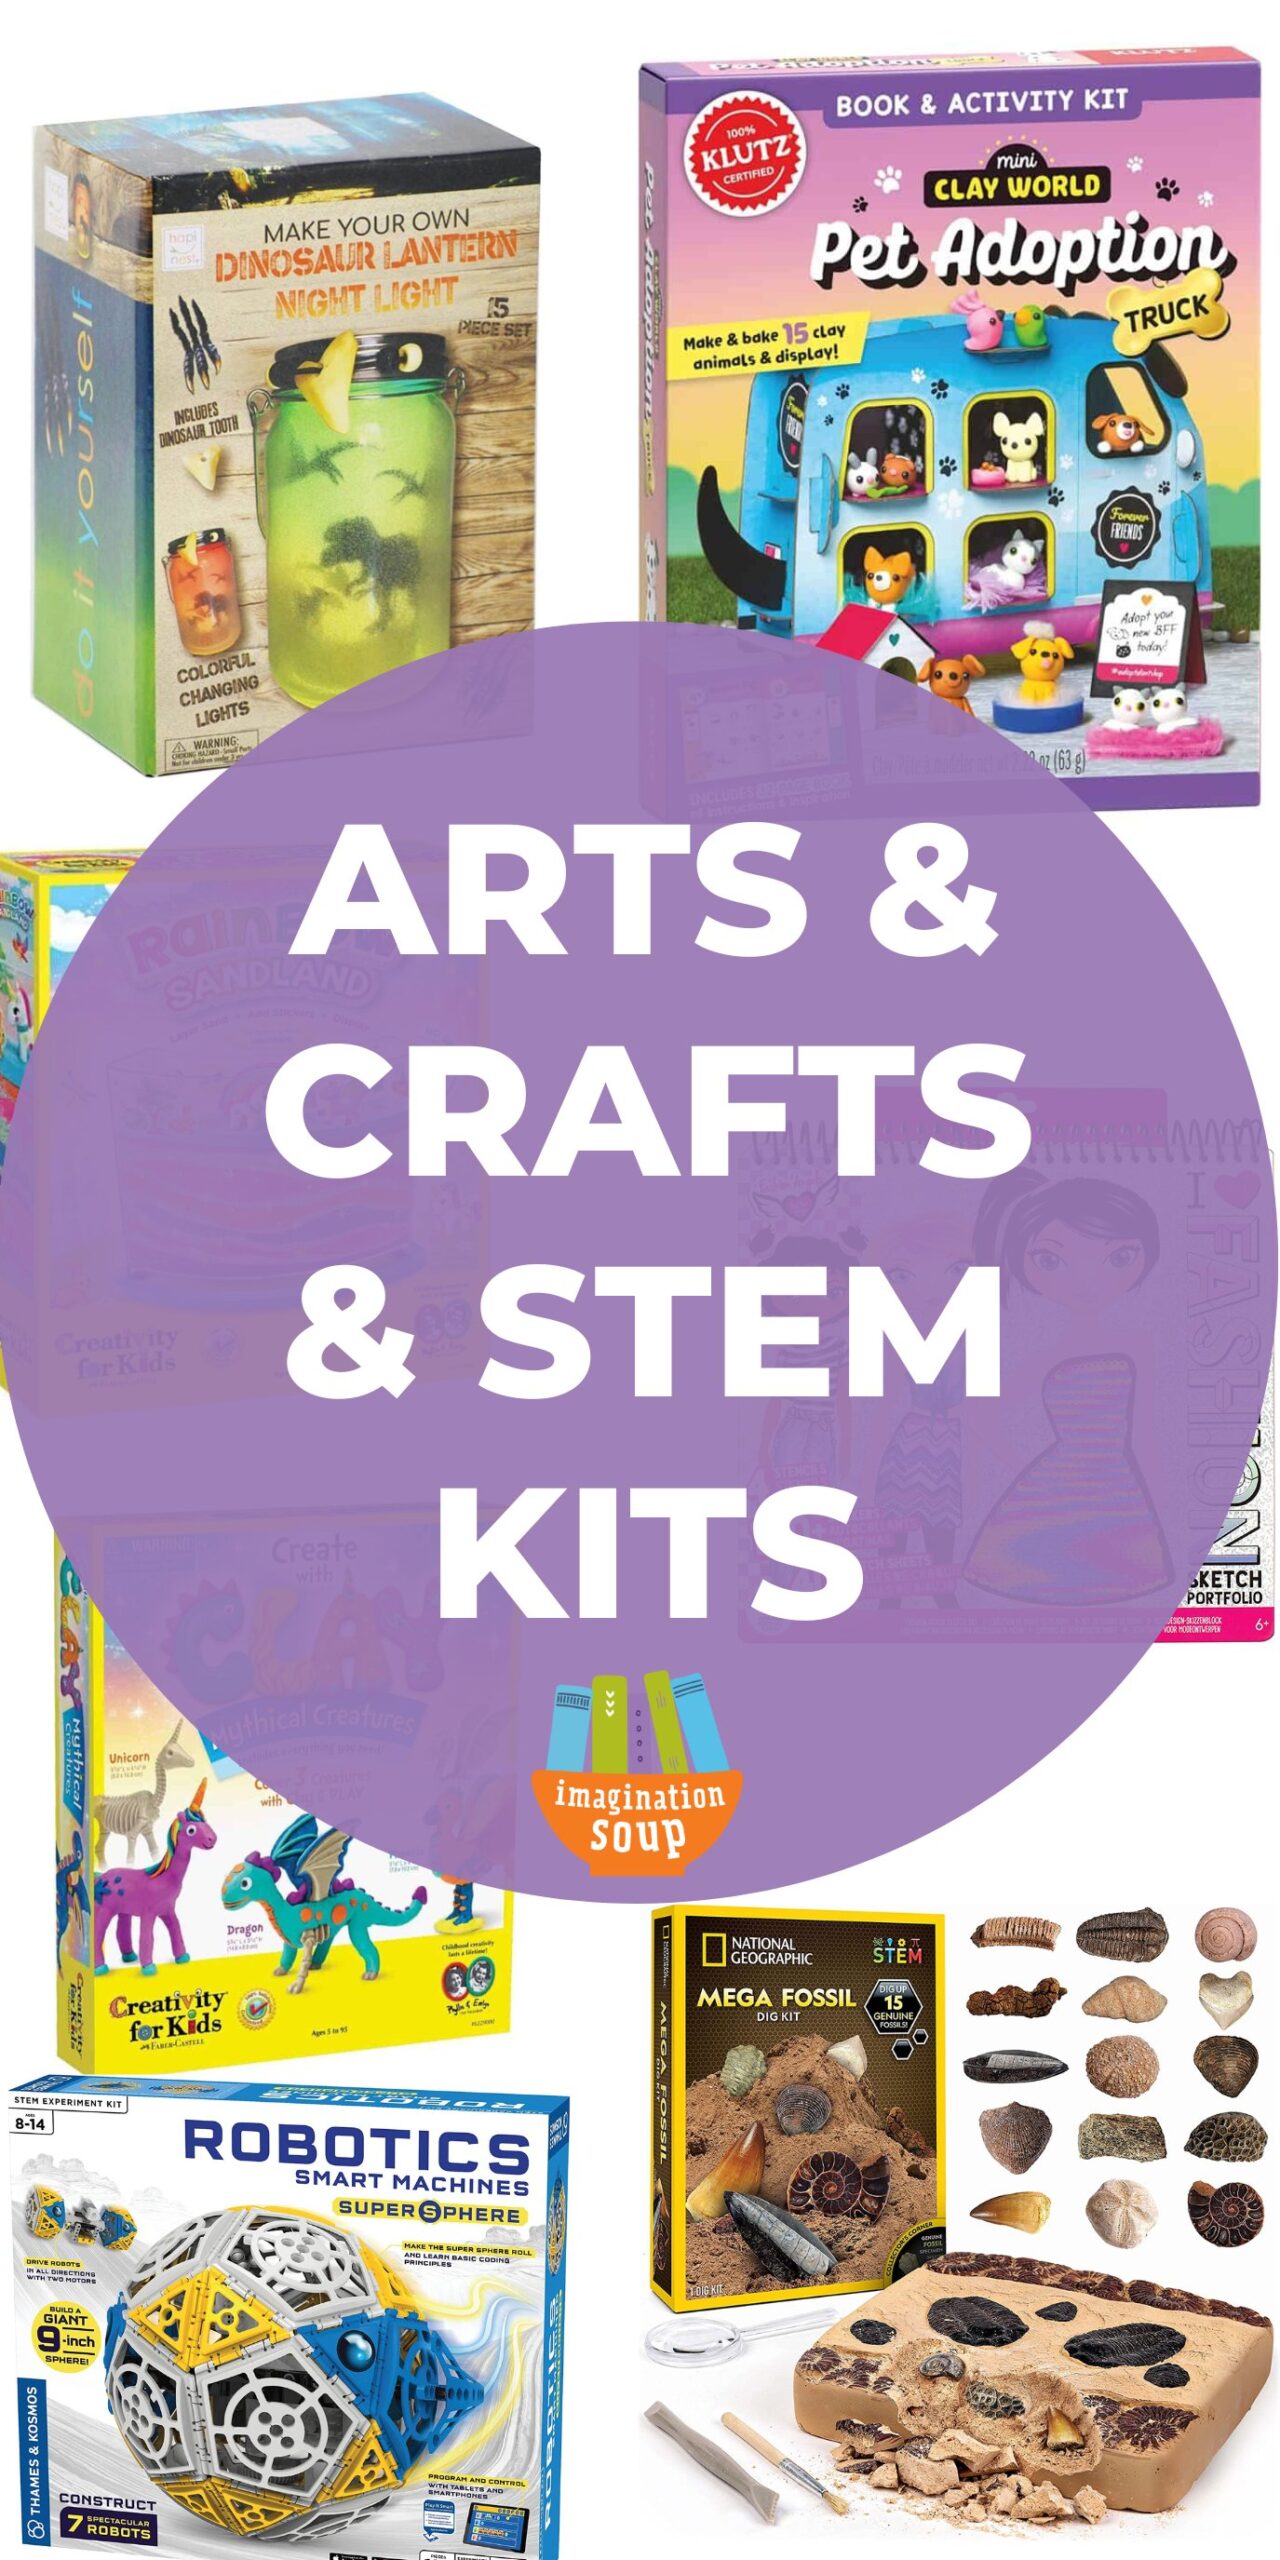 Arts and crafts for kids kits and STEM activity kits for your kids with supplies can be really helpful for time spent at home. (For summer or anytime.)